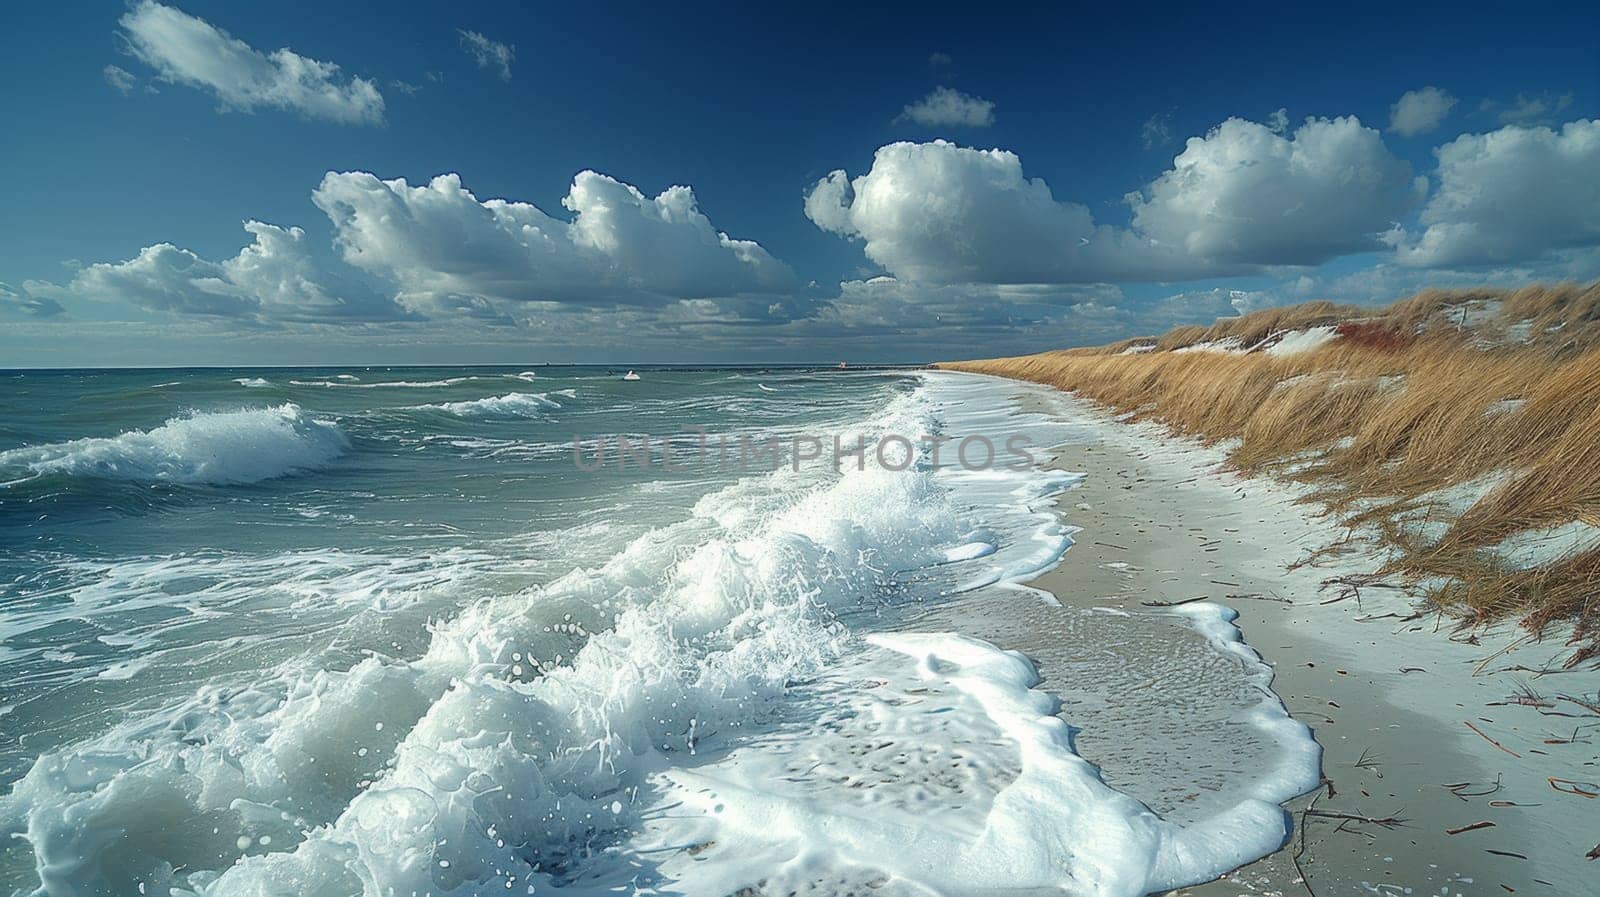 A beach with waves crashing on the shore and grasses blowing in the wind, AI by starush